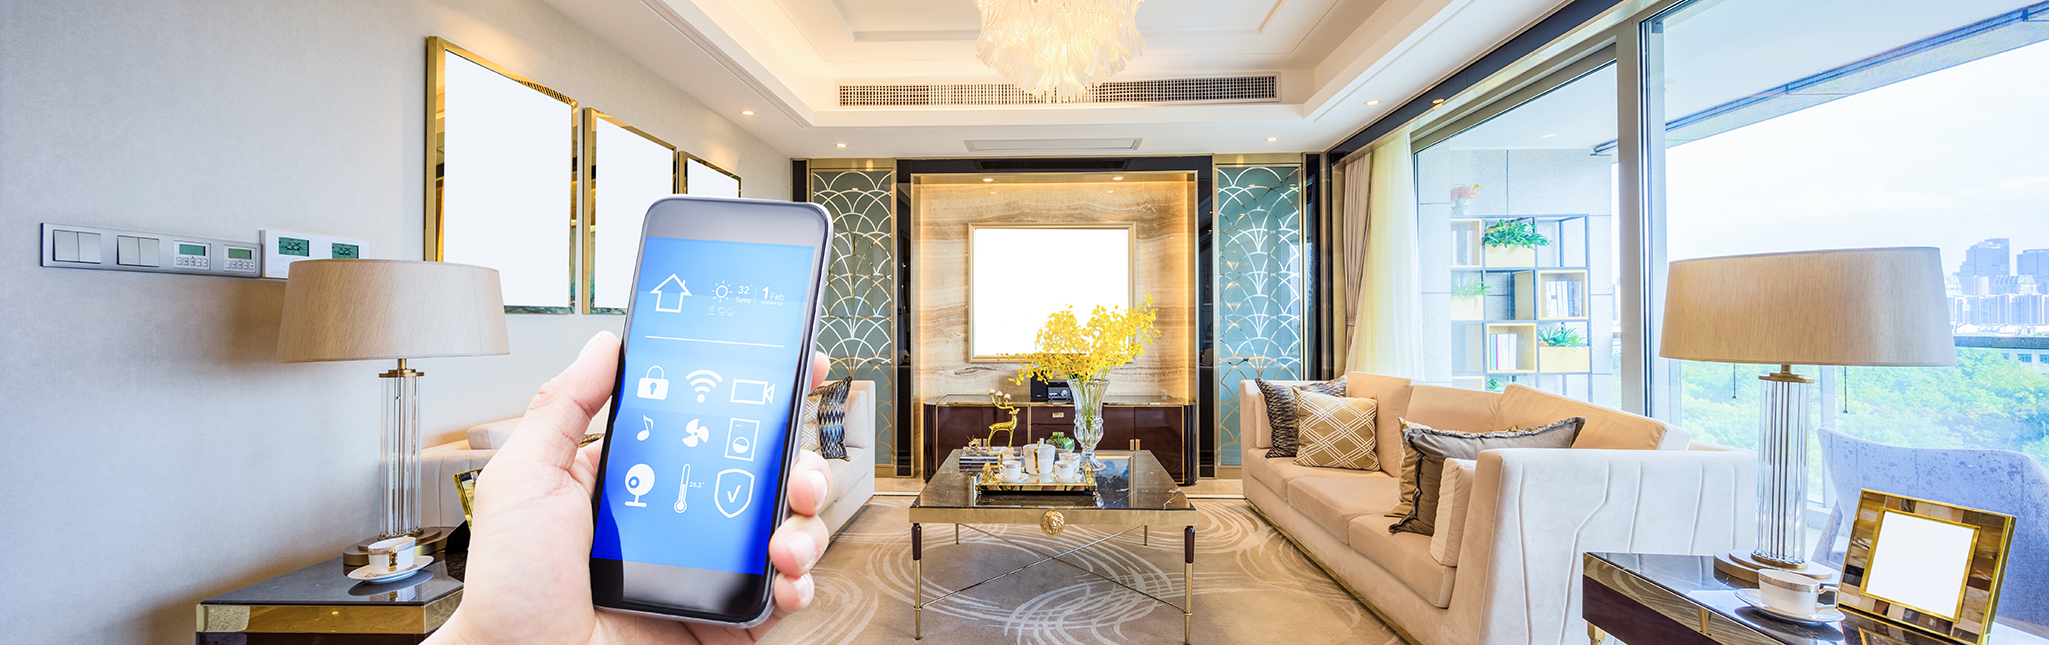 What is Home Automation and Integration?